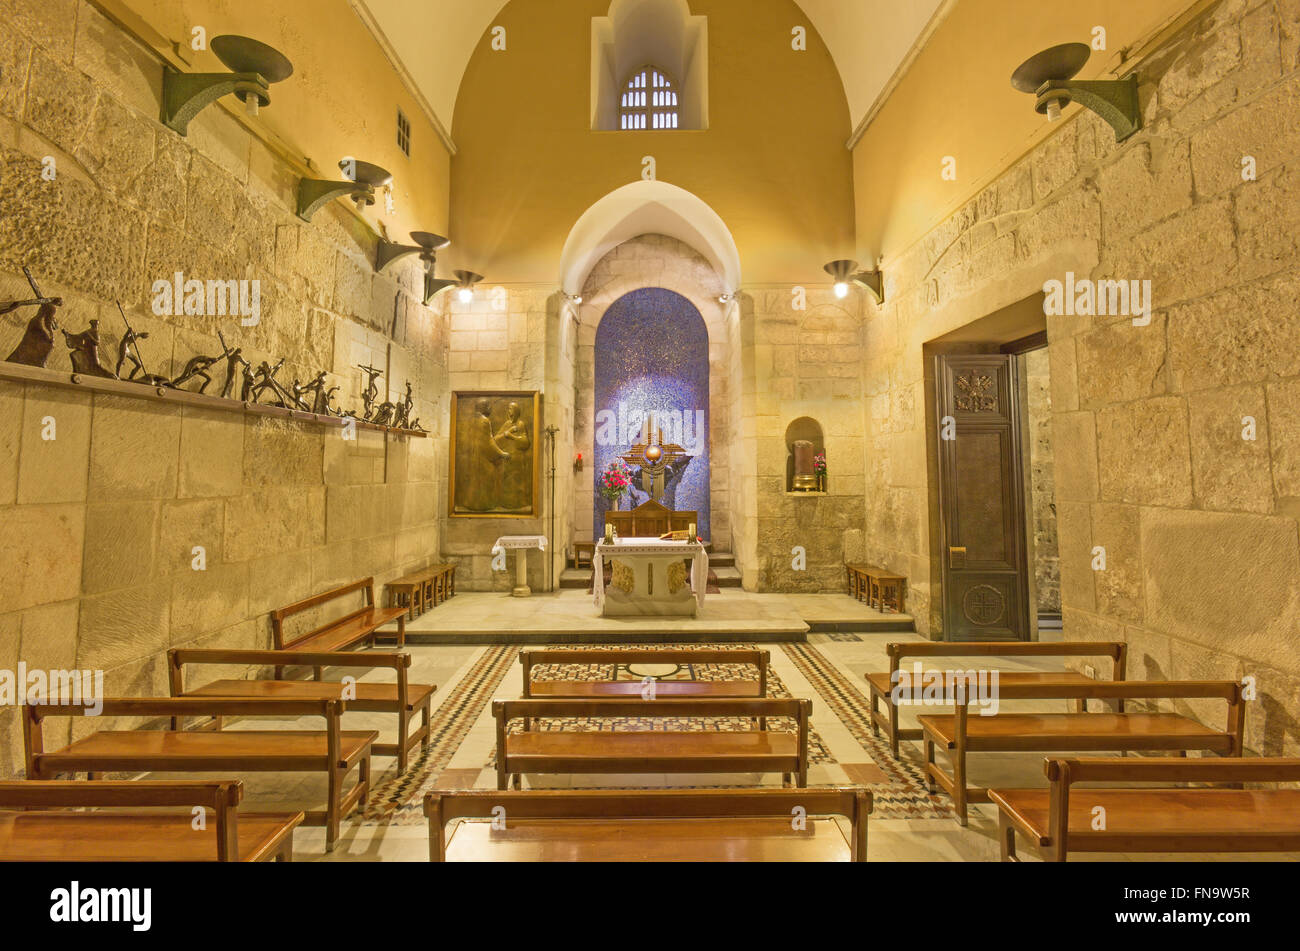 JERUSALEM, ISRAEL - MARCH 4, 2015: The catholic Chapel of the Apparition in the Church of Holy Sepulchre. Stock Photo